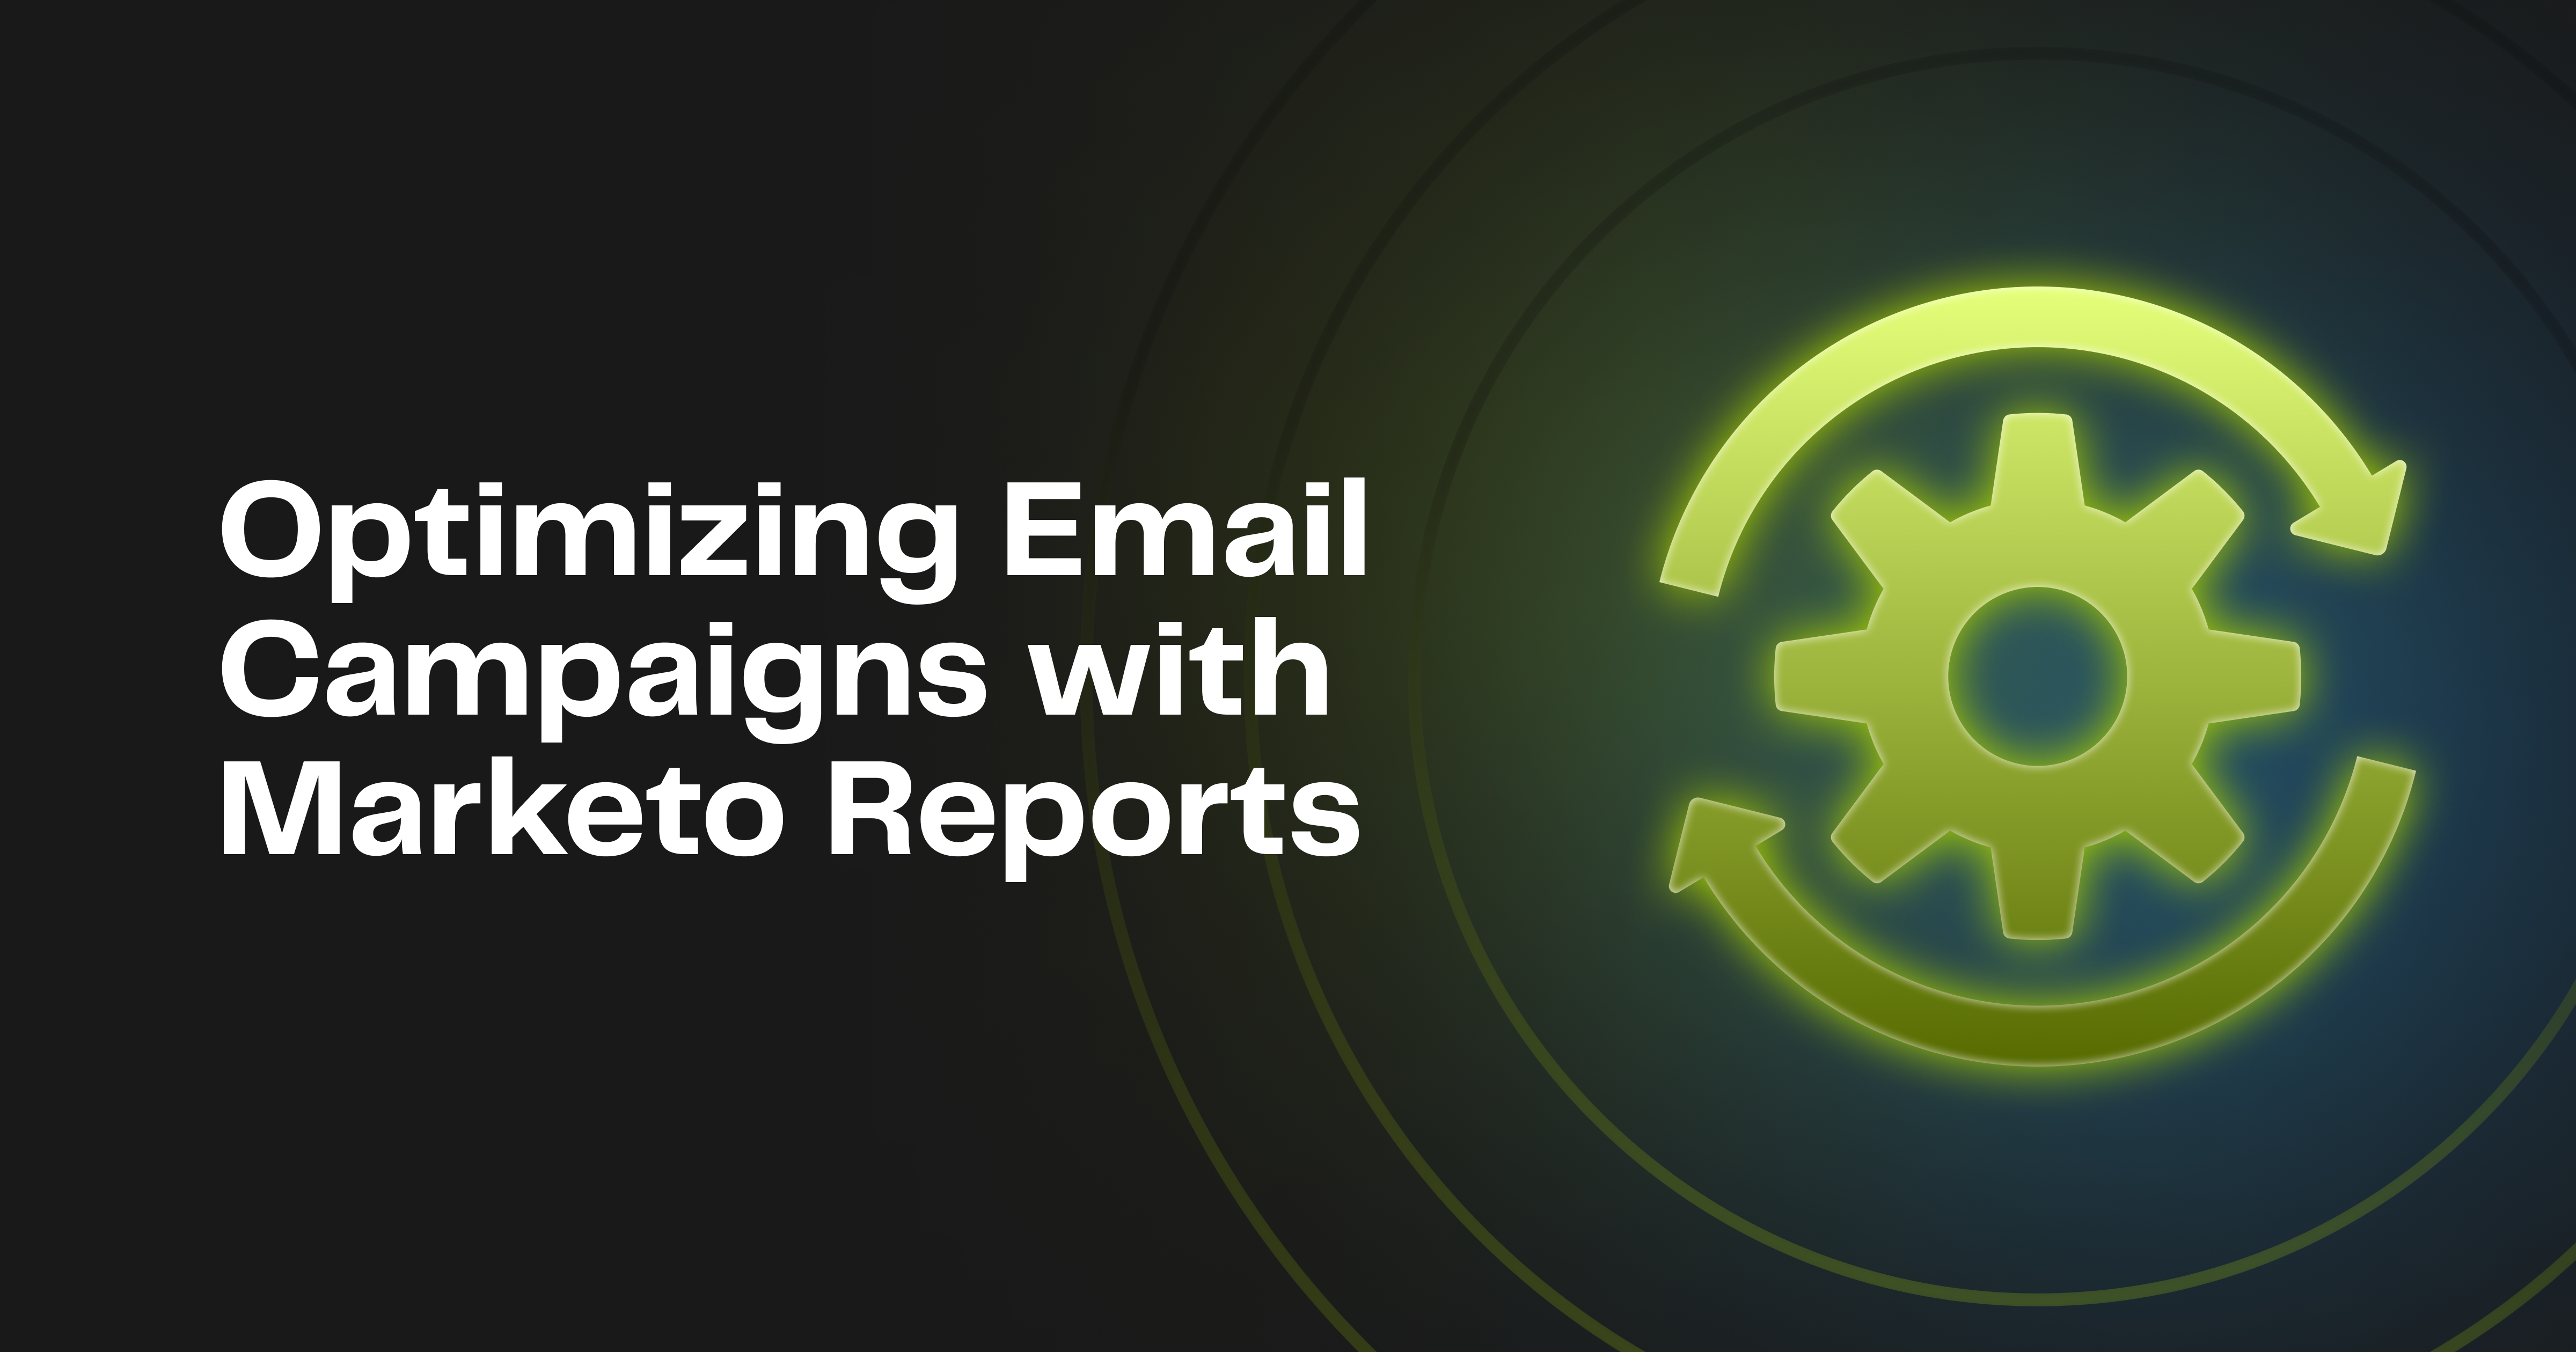 Optimizing Email Campaigns with Marketo Reports